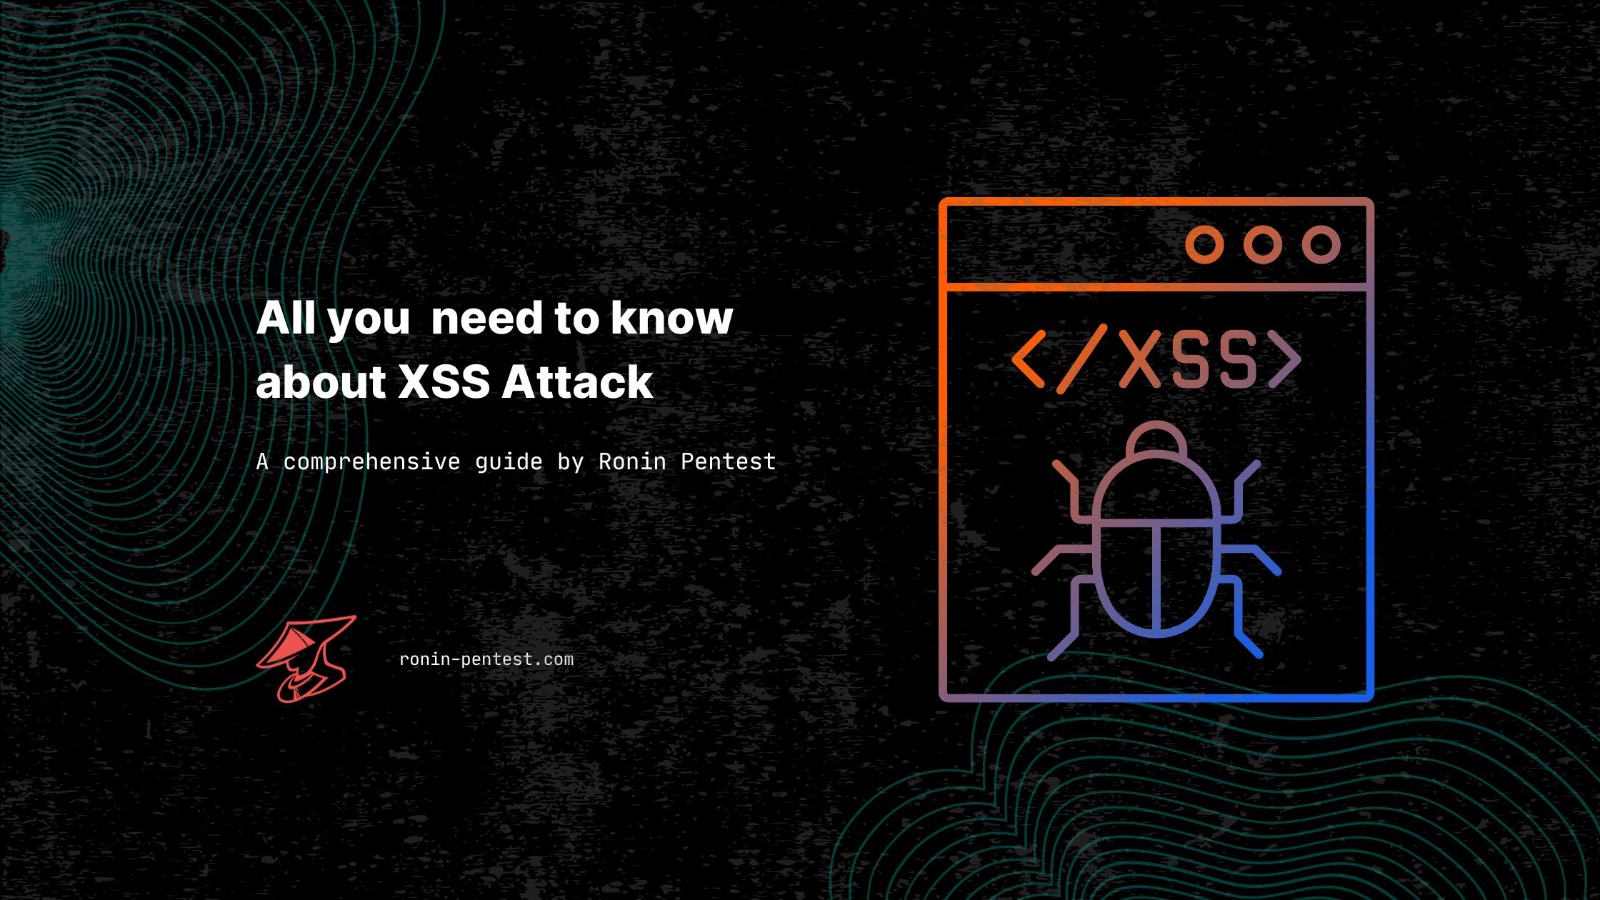 Ronin-Pentest | A Comprehensive Guide to Thwarting XSS Attacks